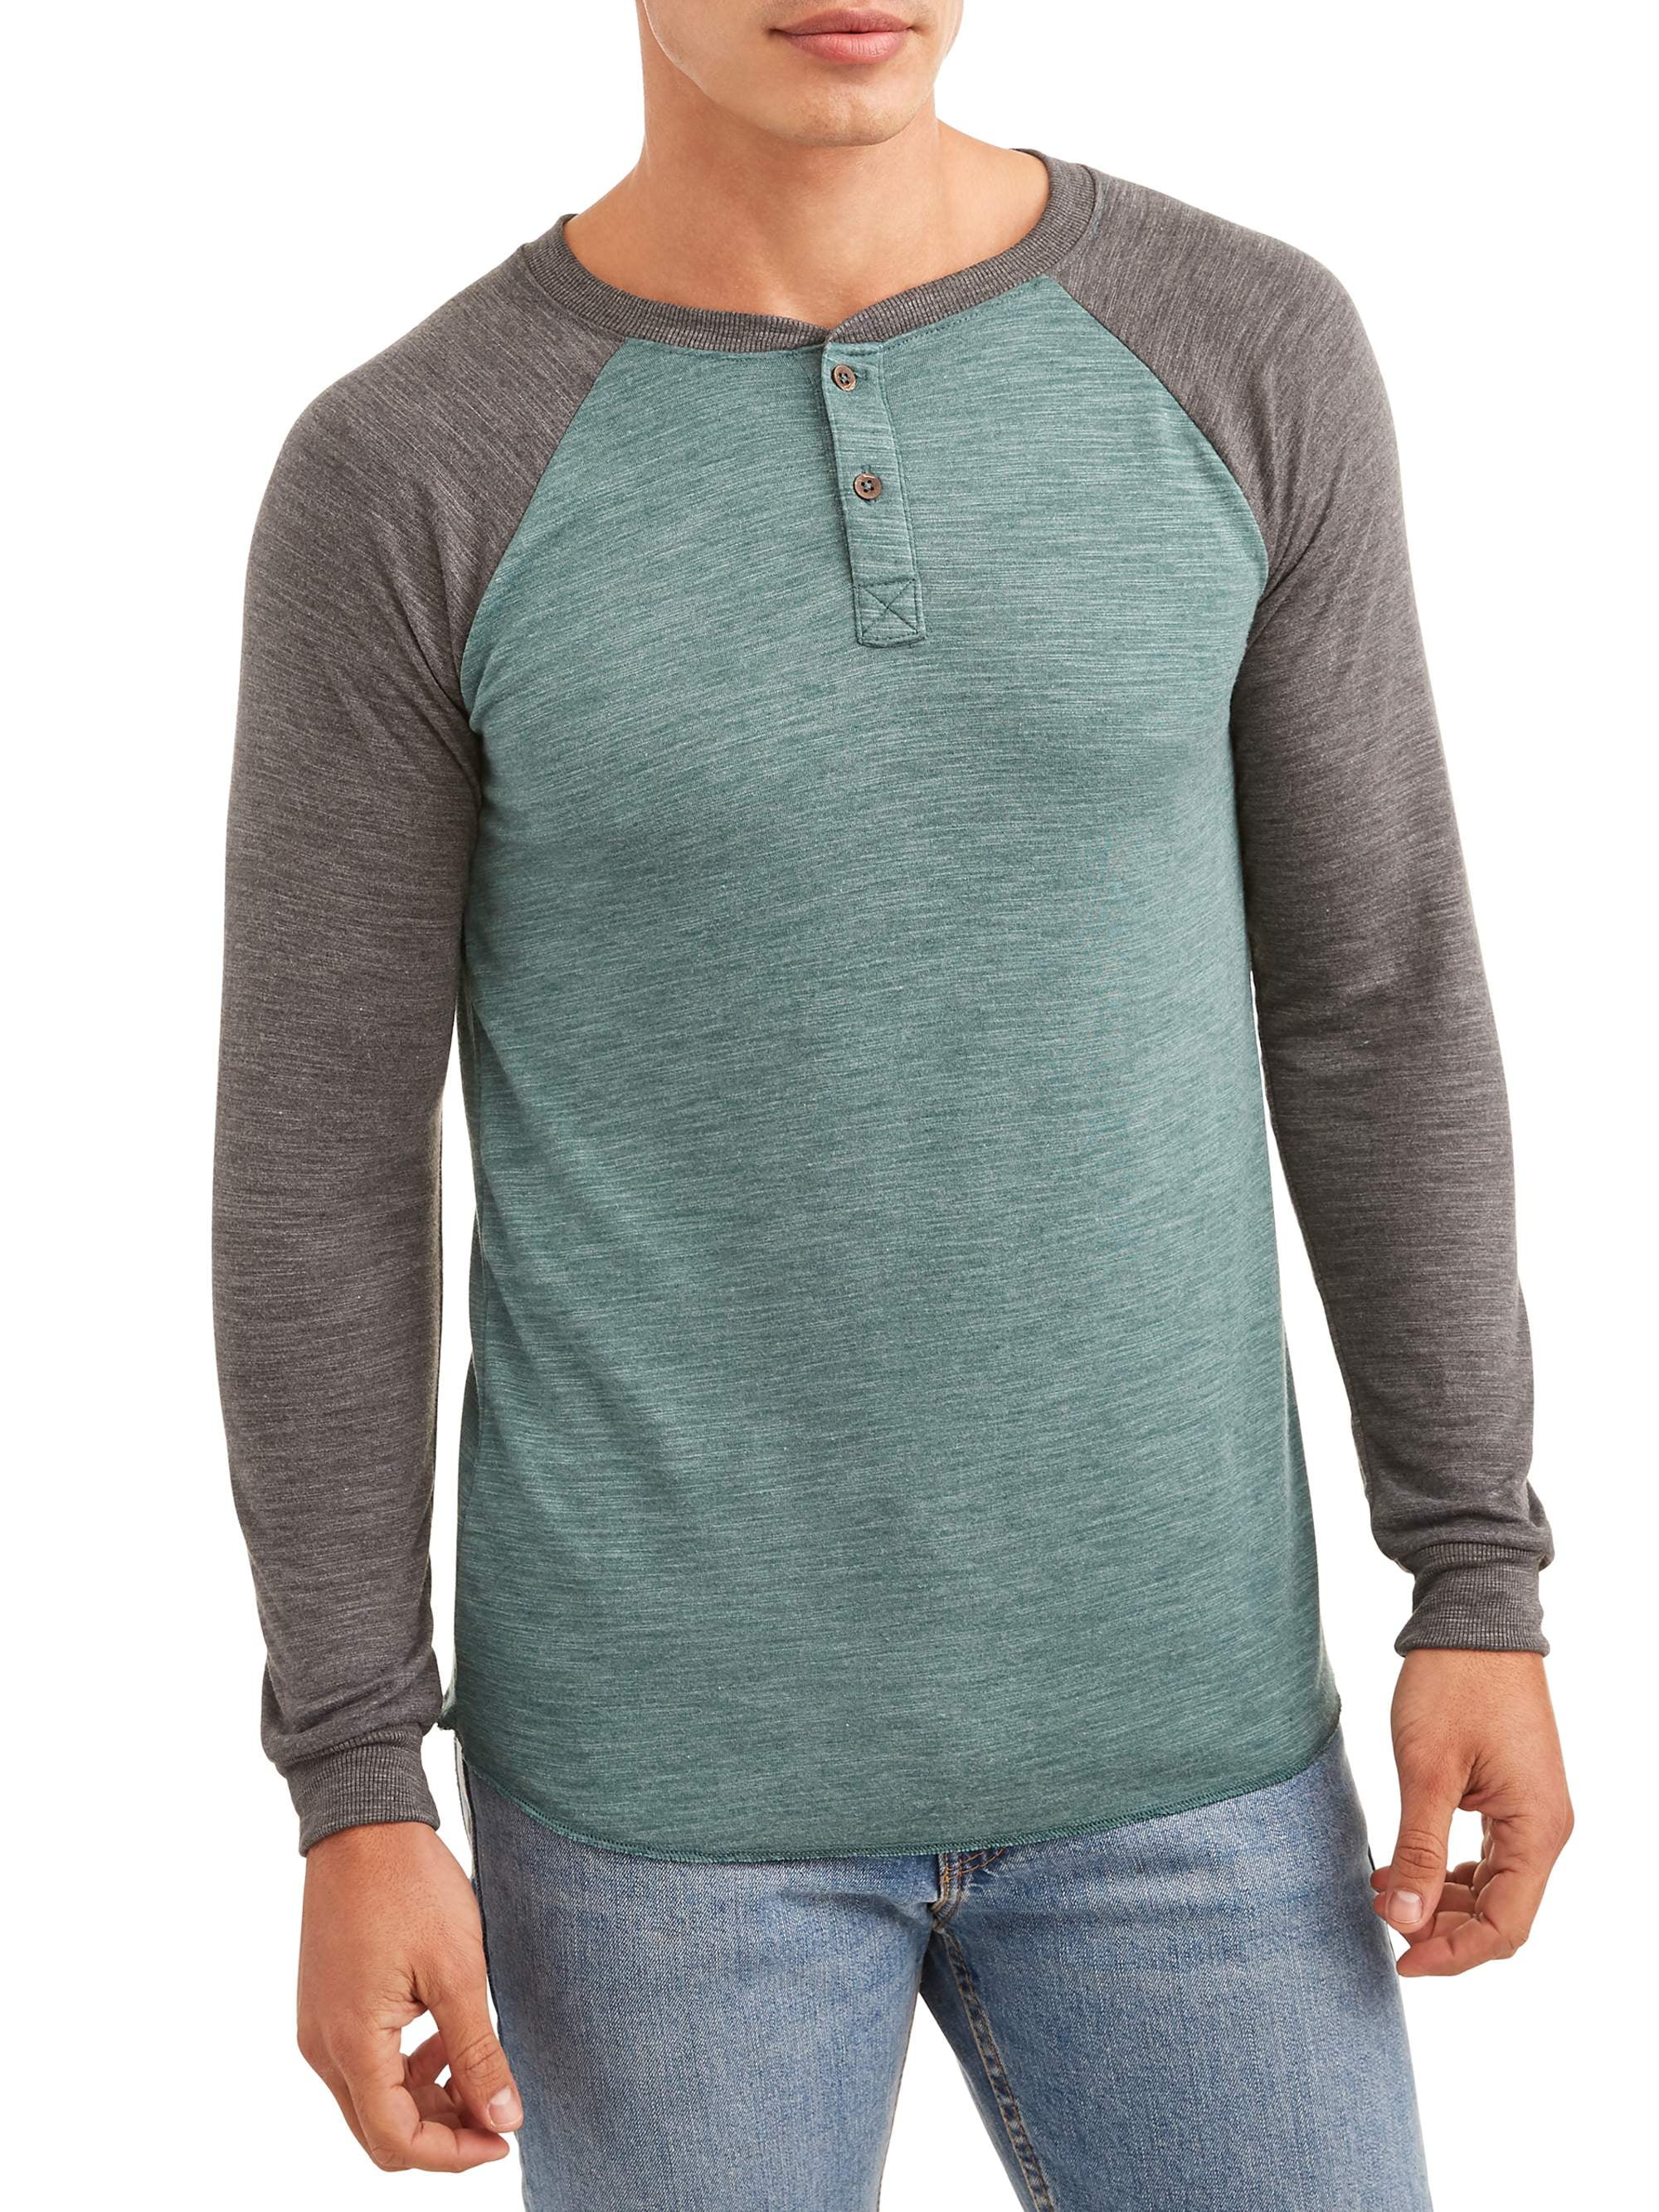 George Men's Long Sleeve Soft Double Knit Henley Raglan T-Shirt, Up to ...